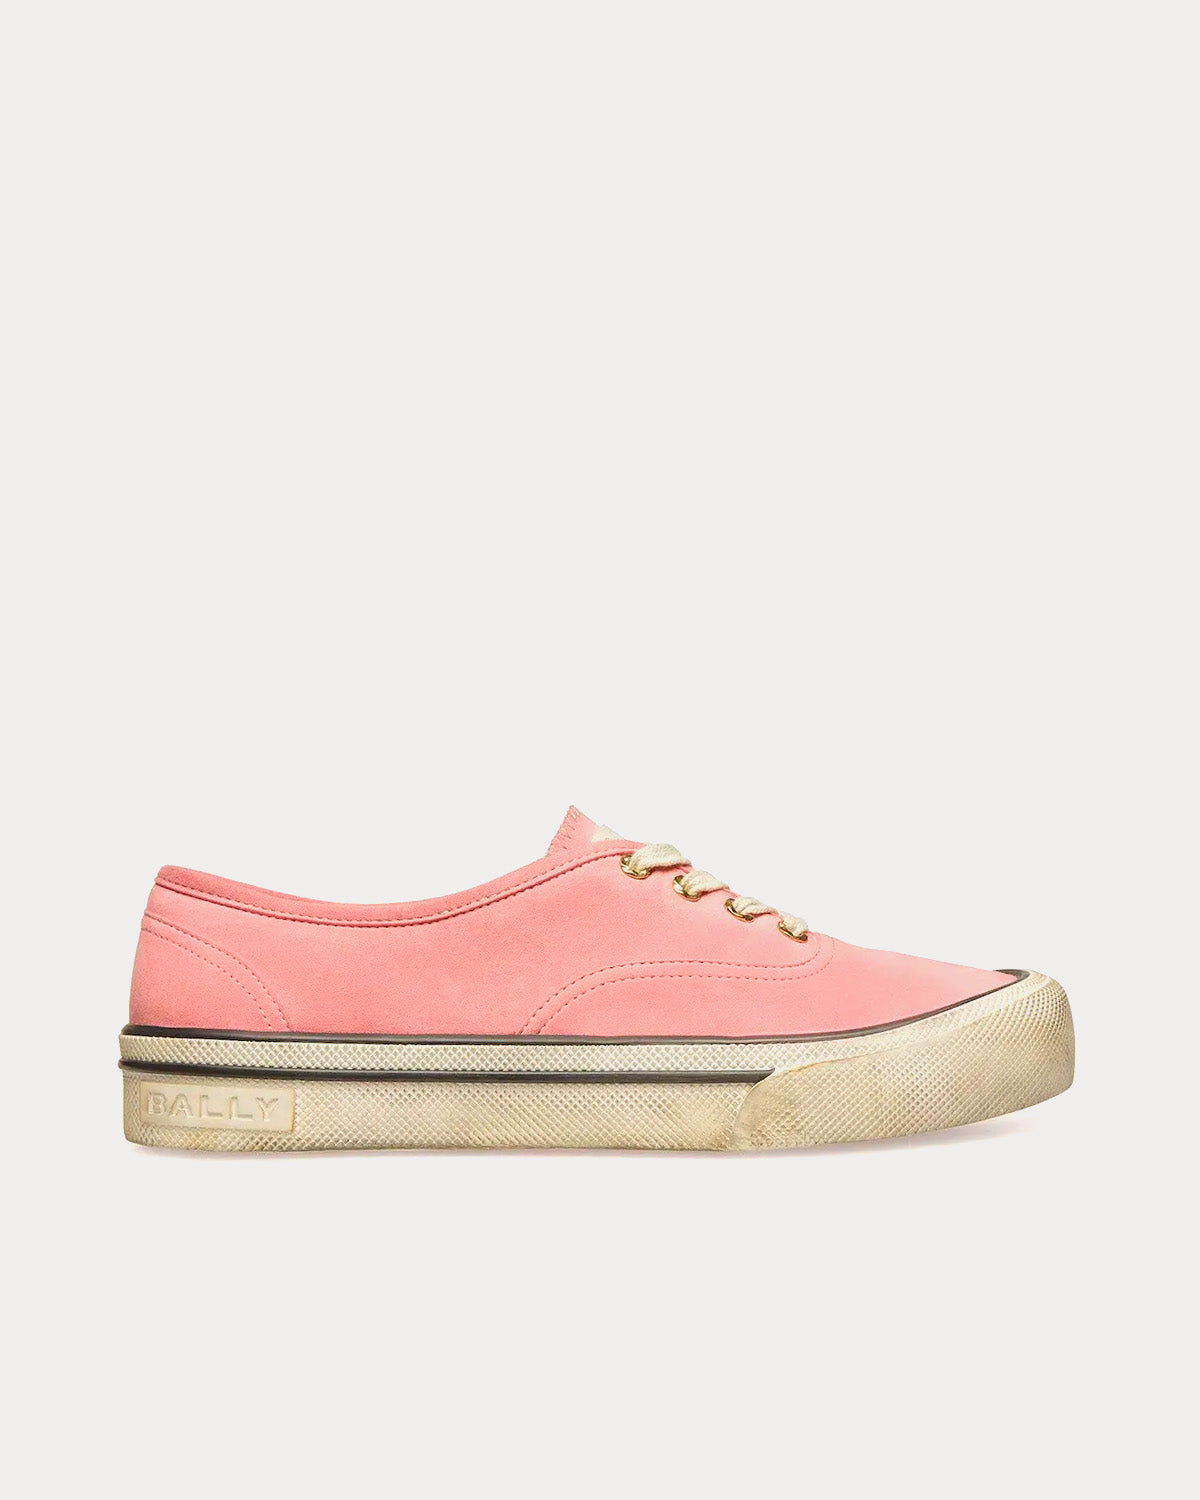 Bally - Santa Ana Suede Pink Low Top Sneakers